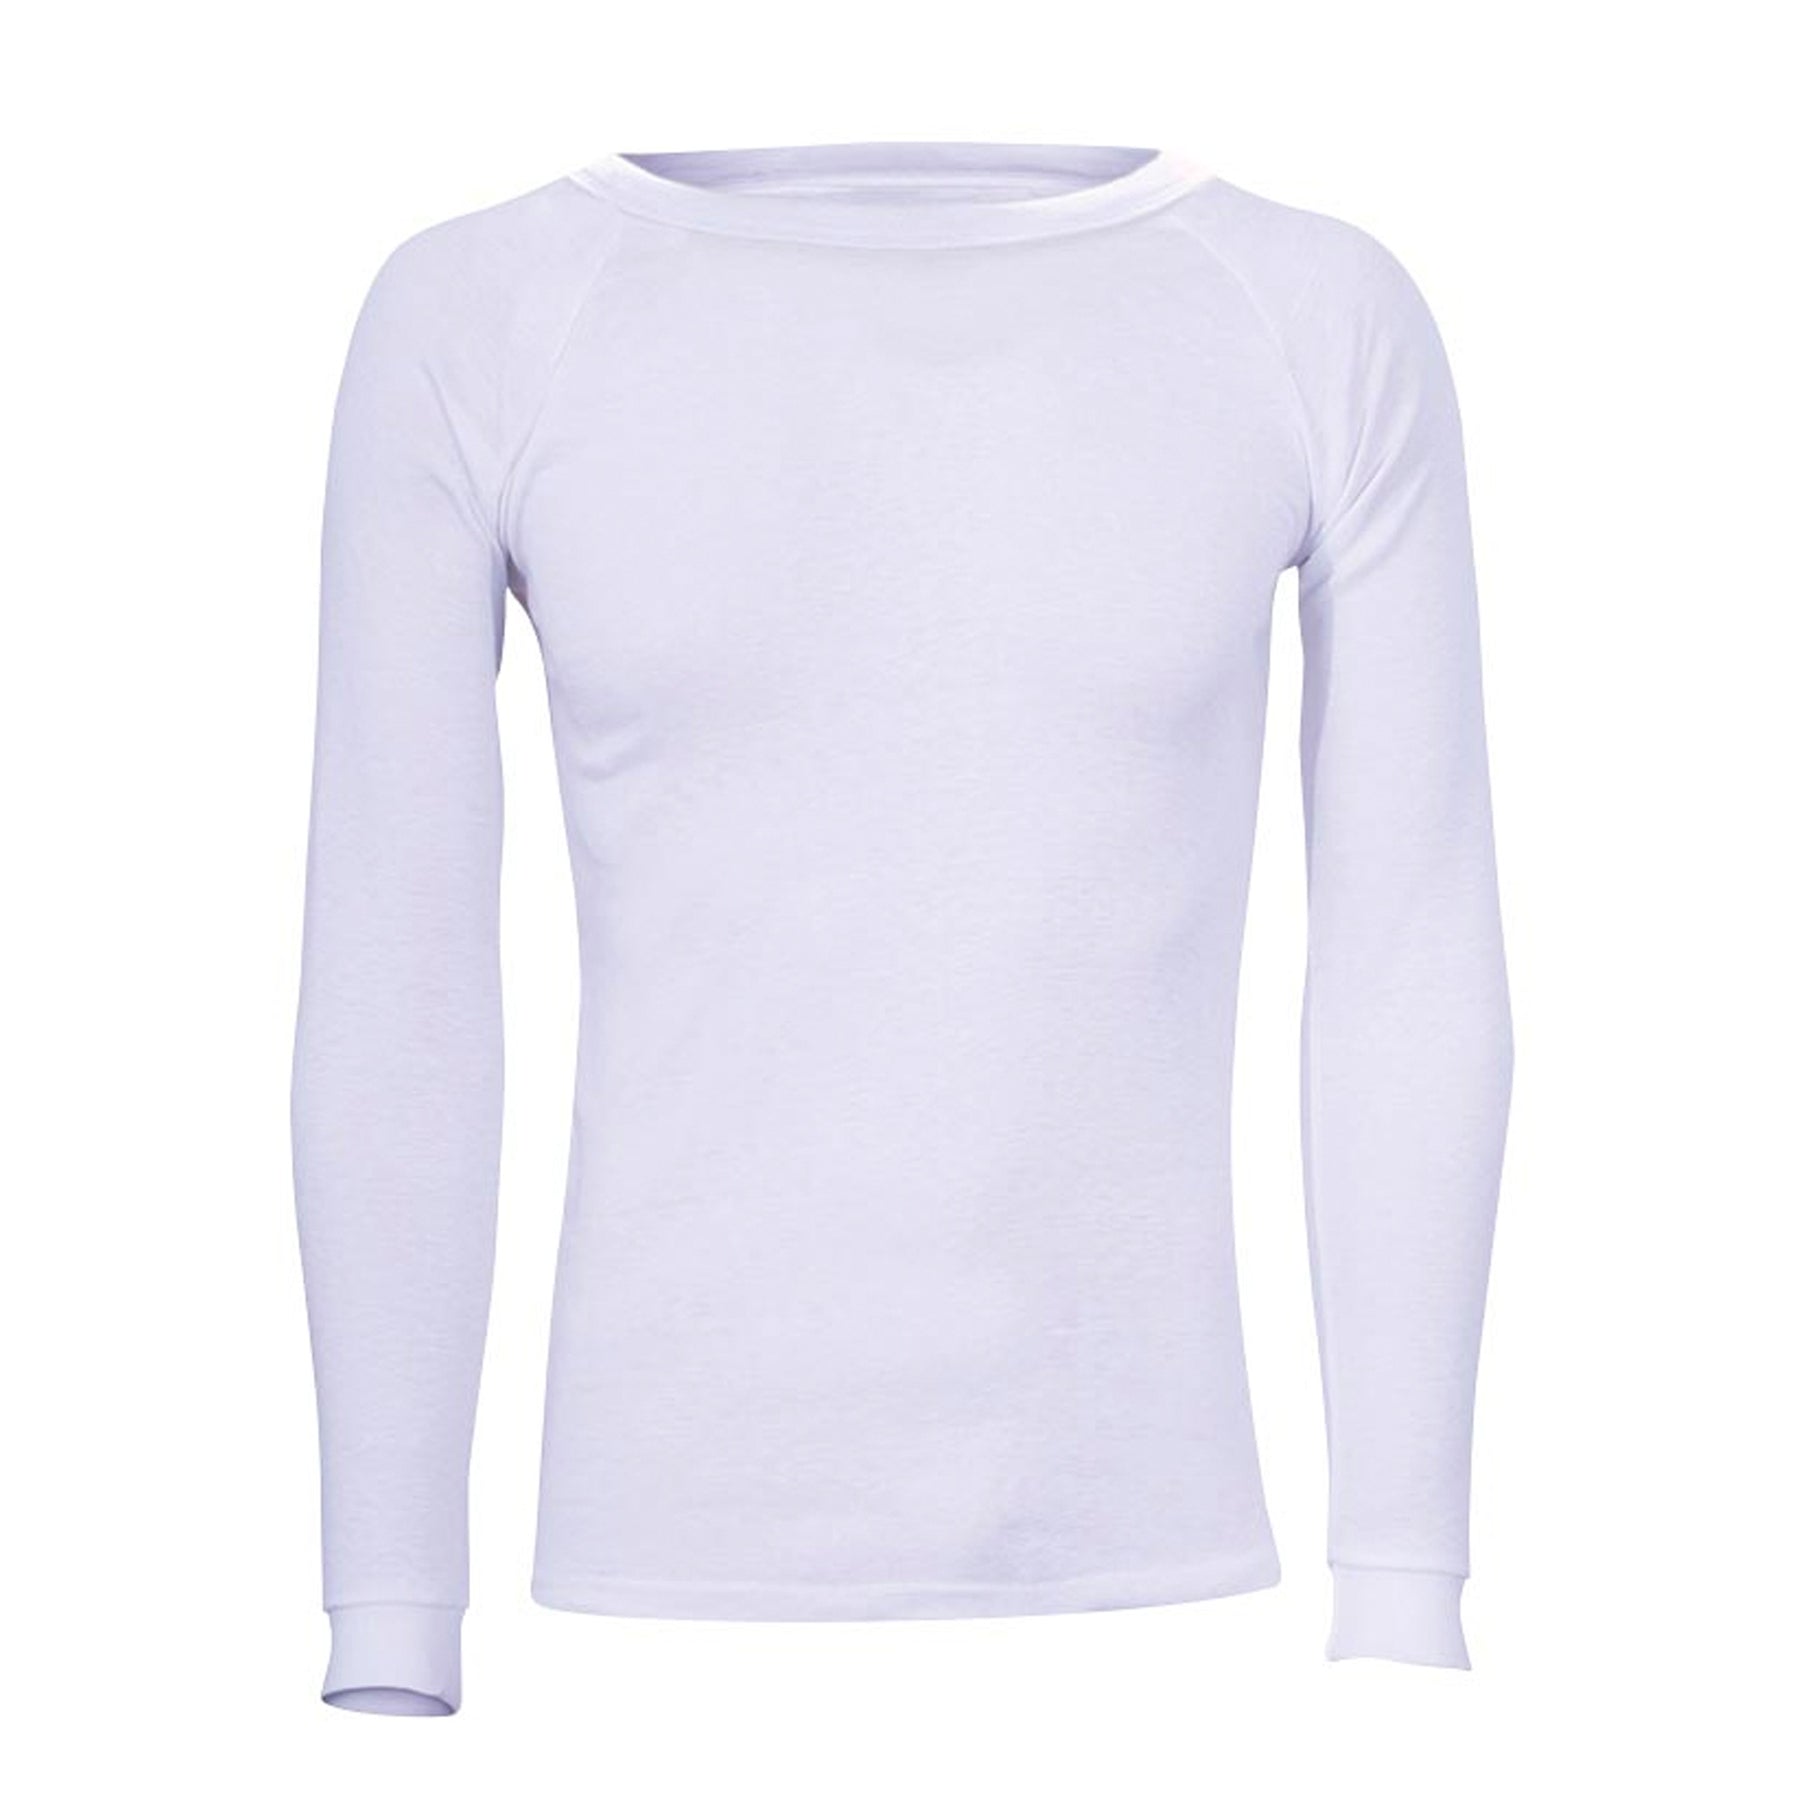 thermal polypropylene long sleeve top in white